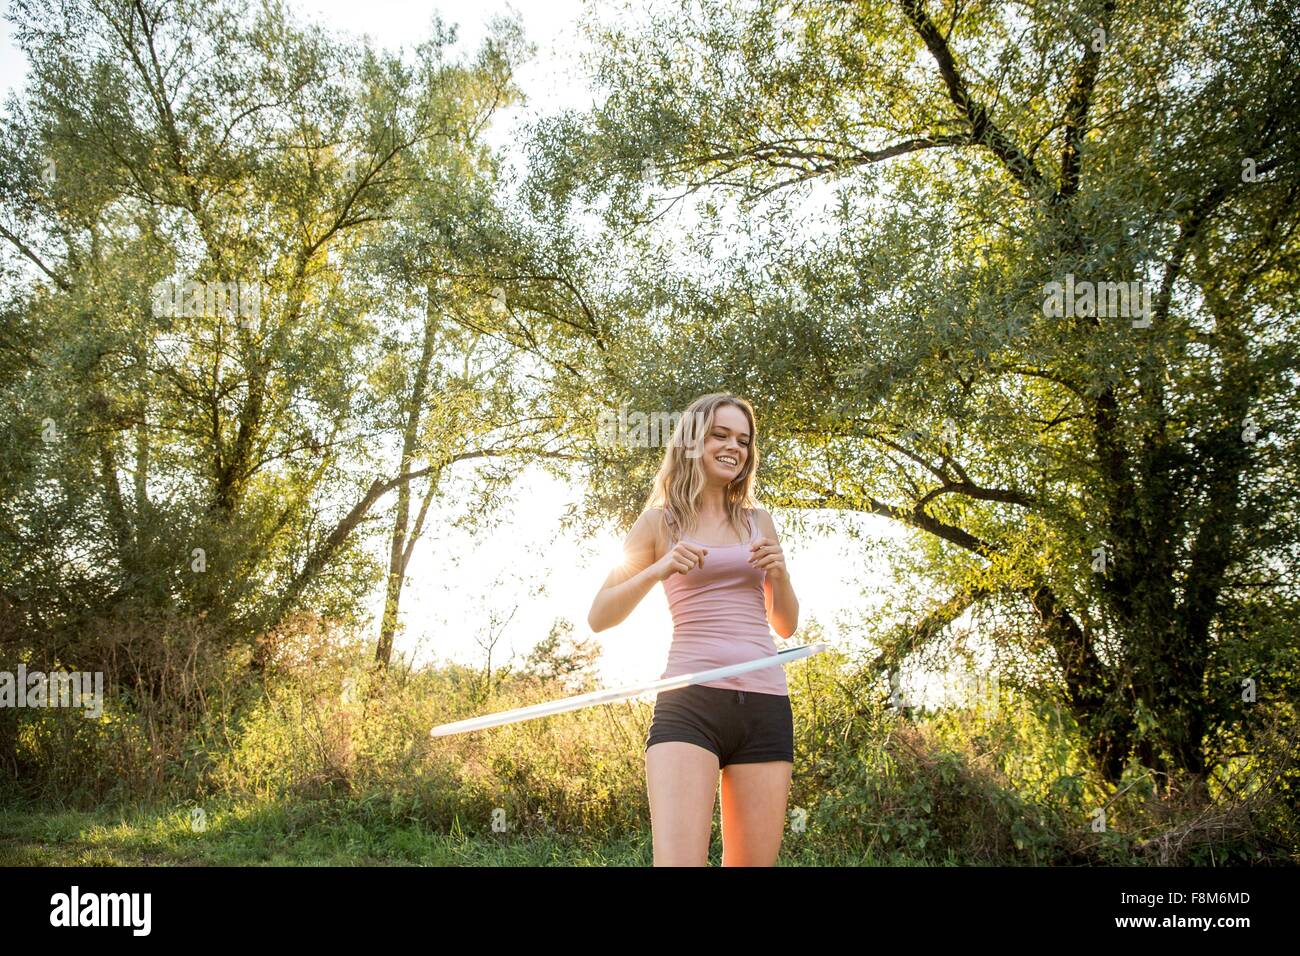 Young girl in rural environment, using hula hoop, smiling Stock Photo